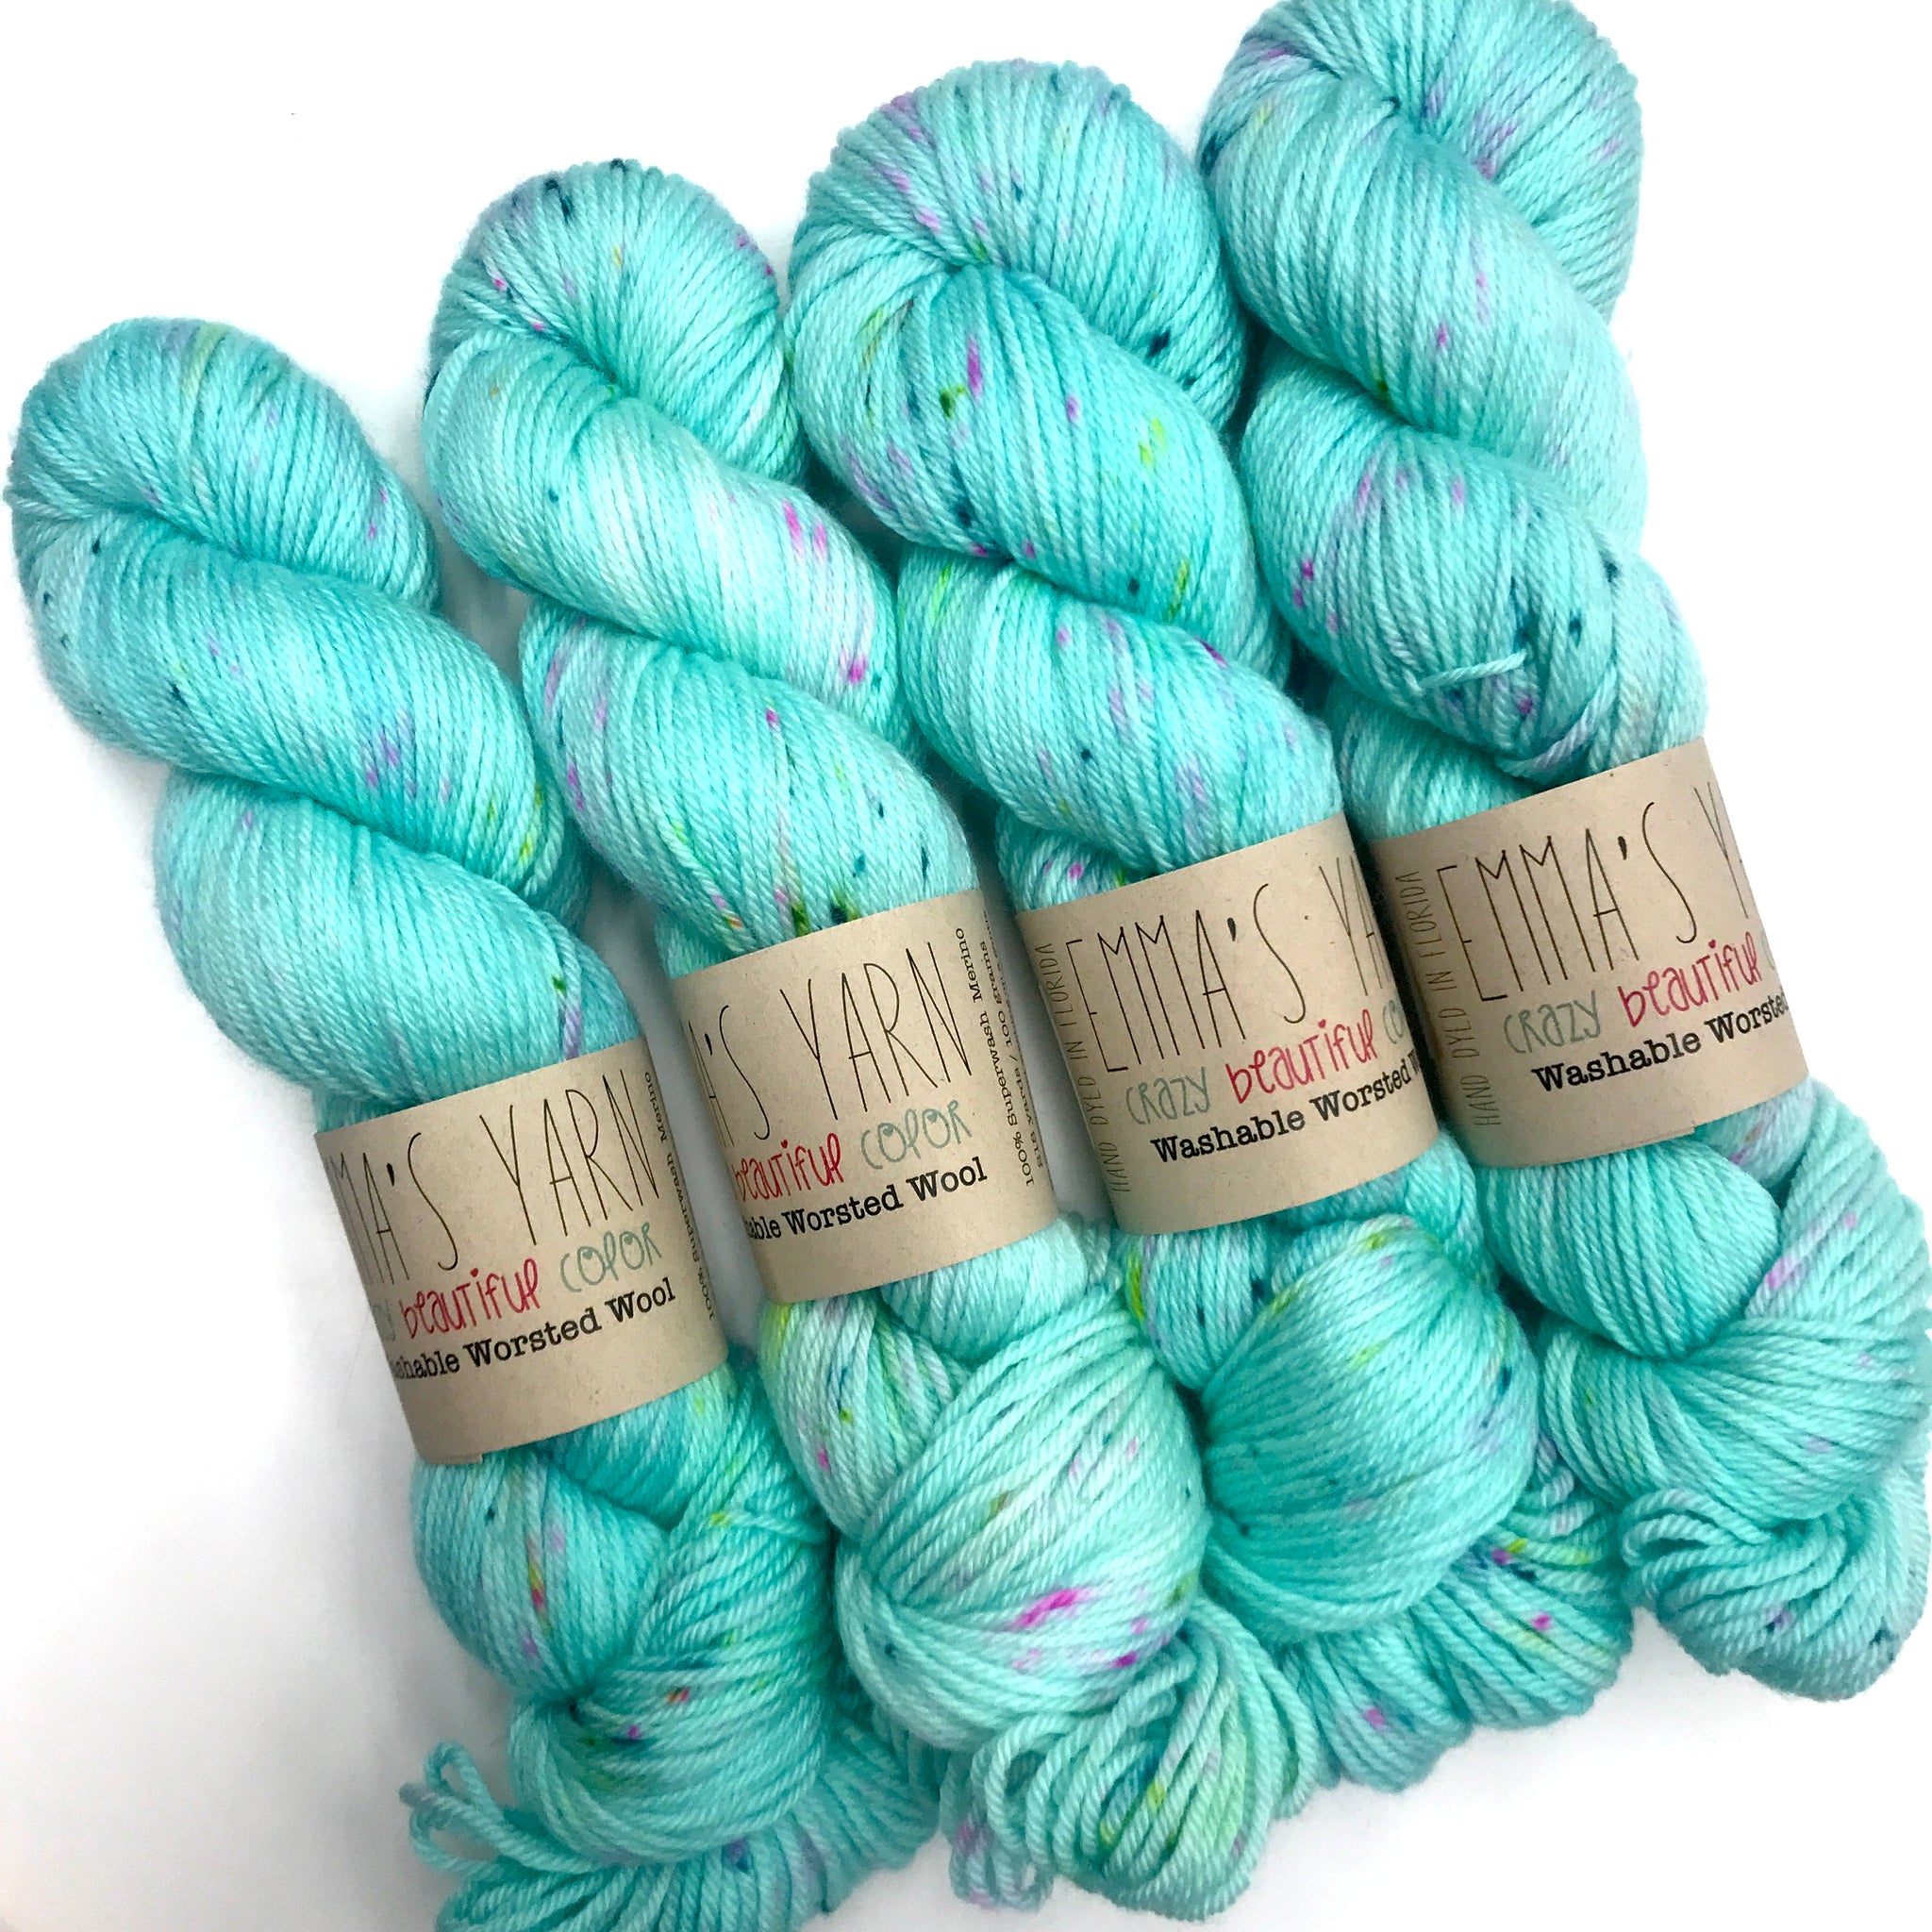 Closet Monster - Washable Worsted Wool